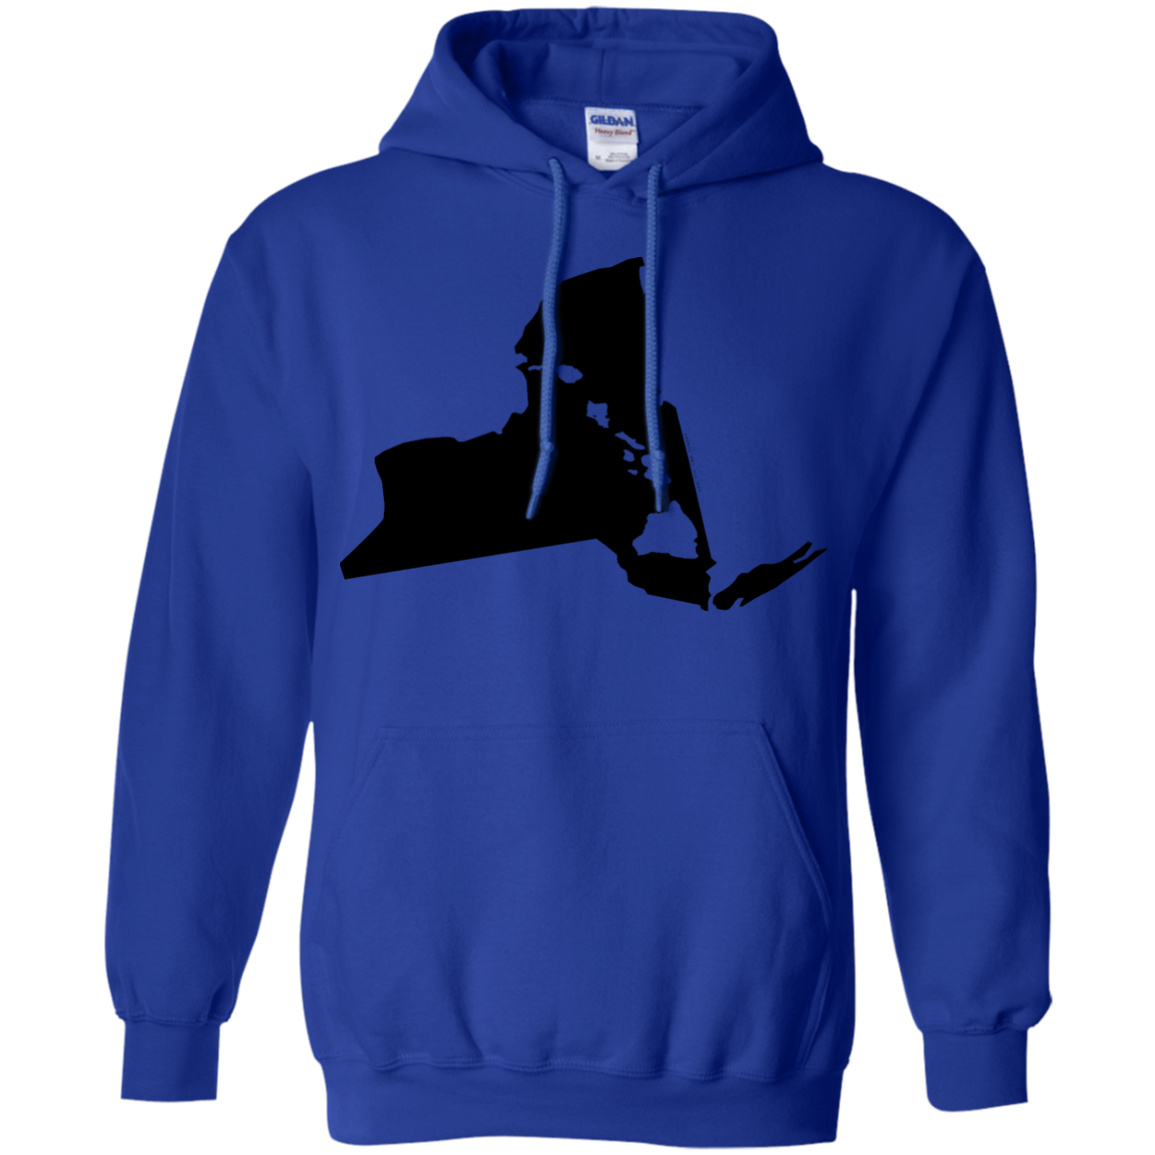 Living In New York With Hawaii Roots Pullover Hoodie 8 oz., Sweatshirts, Hawaii Nei All Day